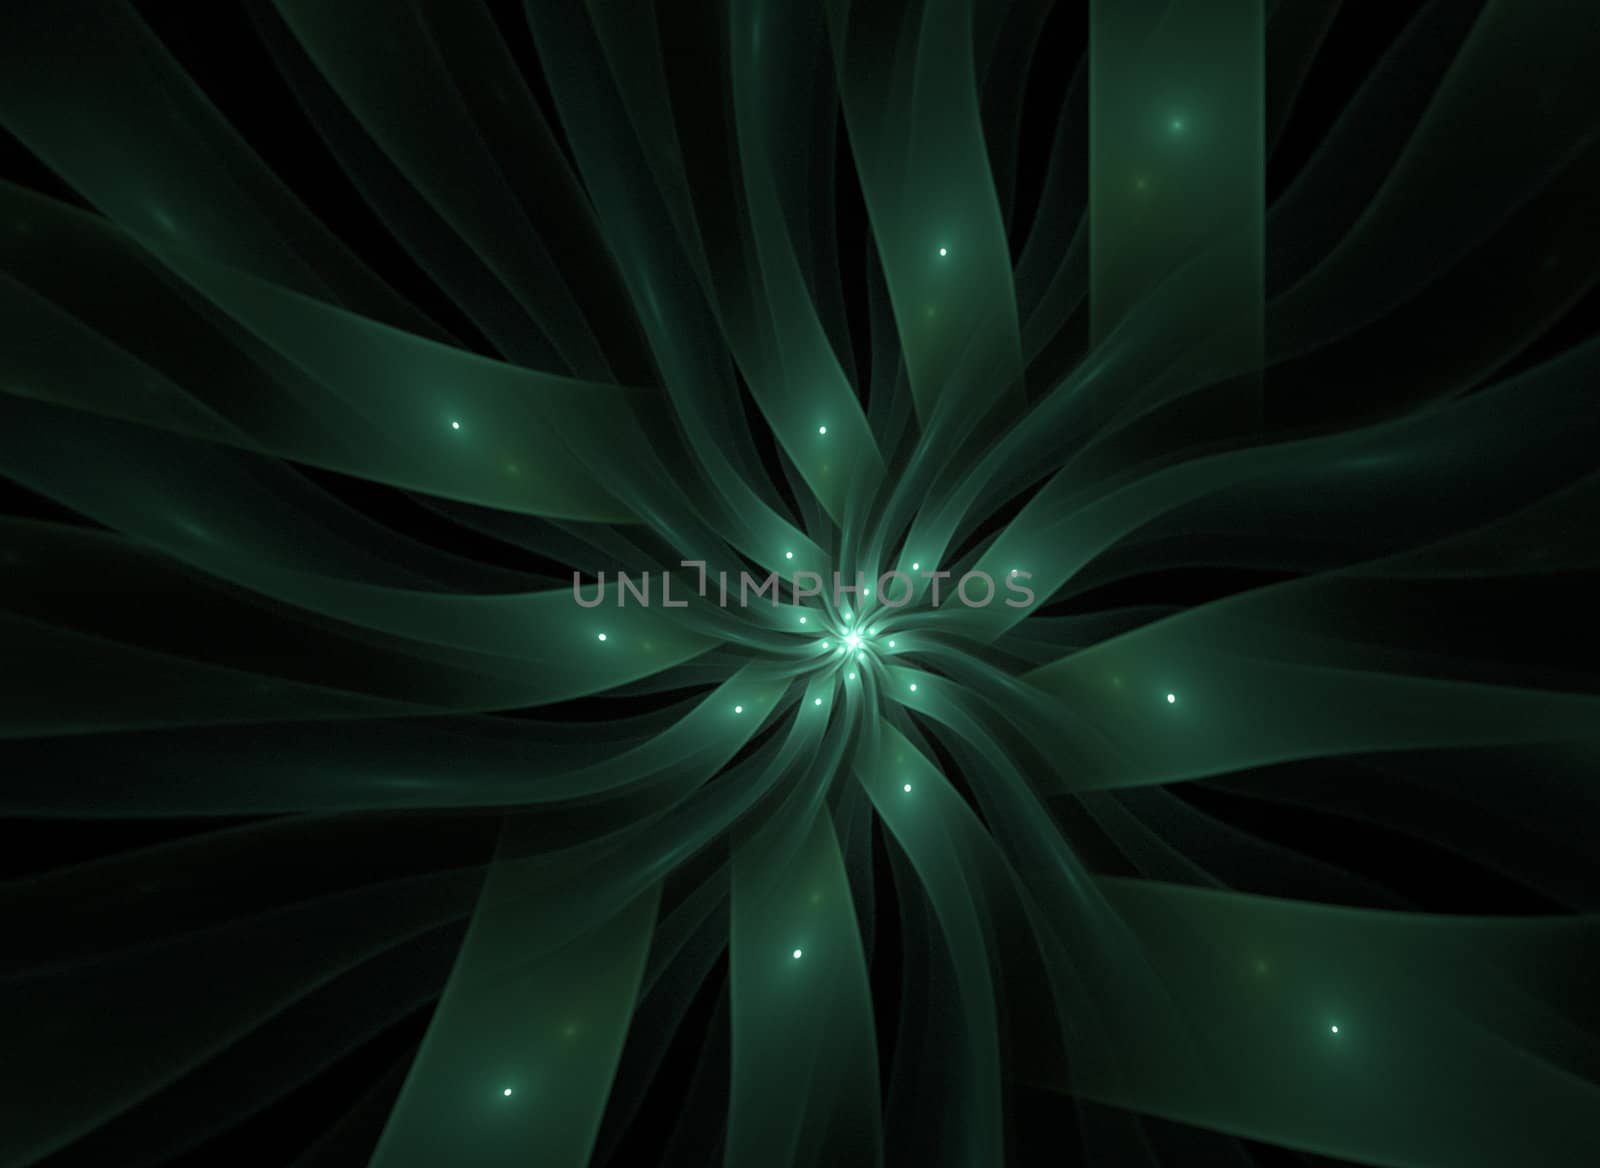 Abstract nature, green background for creative design by FernandoCortes